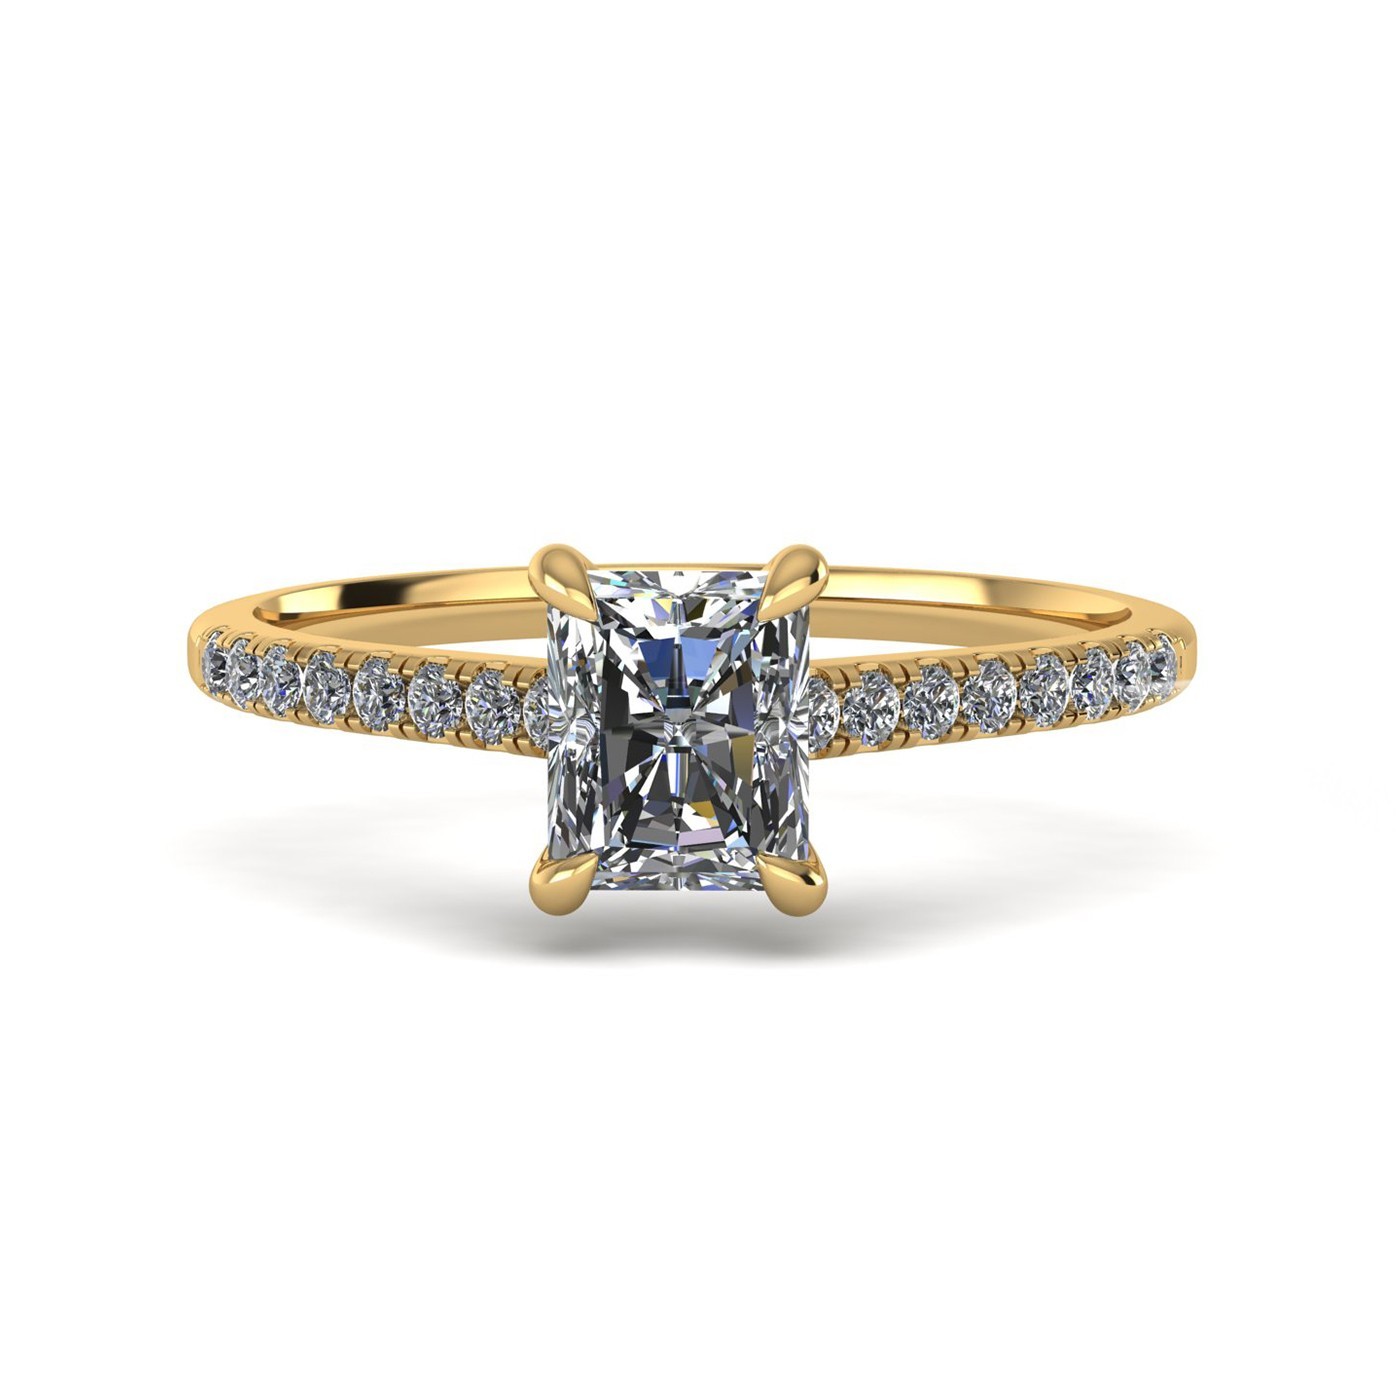 18k yellow gold  2,50 ct 4 prongs radiant cut diamond engagement ring with whisper thin pavÉ set band Photos & images